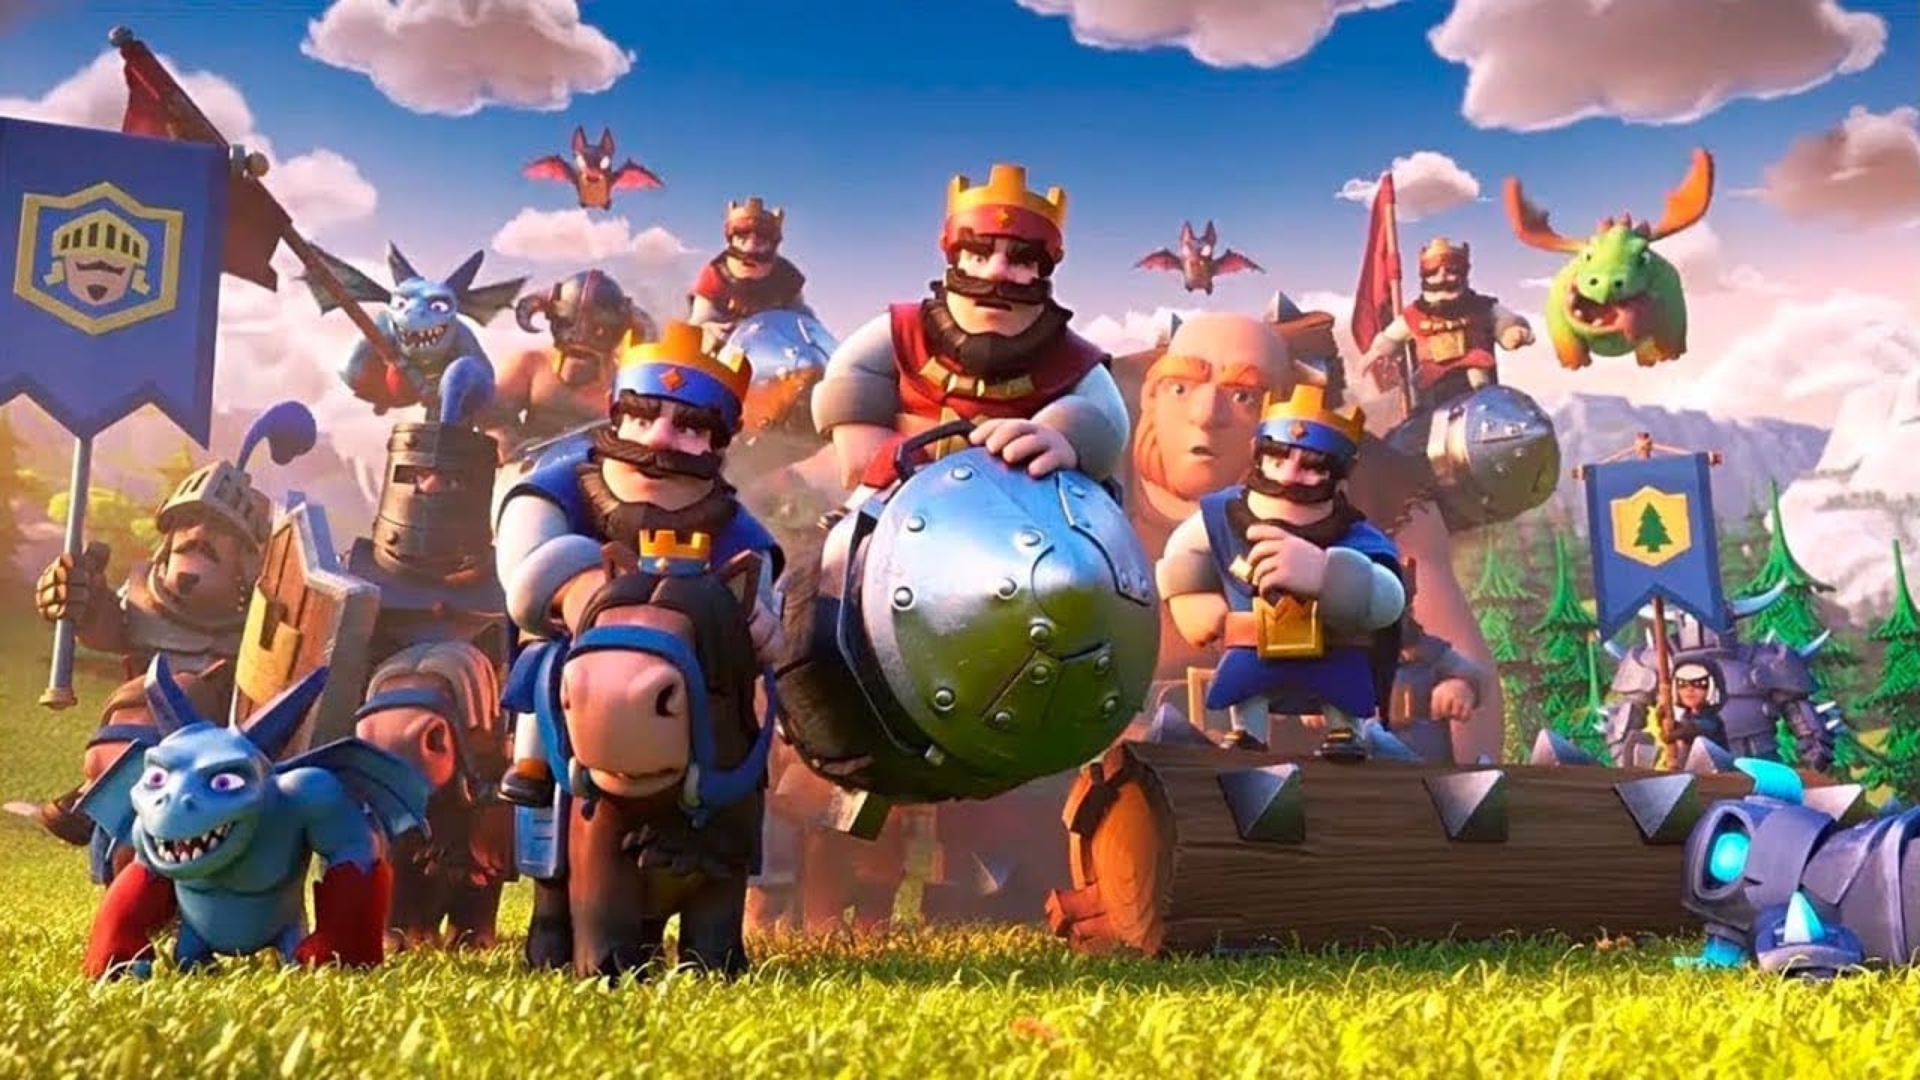 An army in Clash Royale.